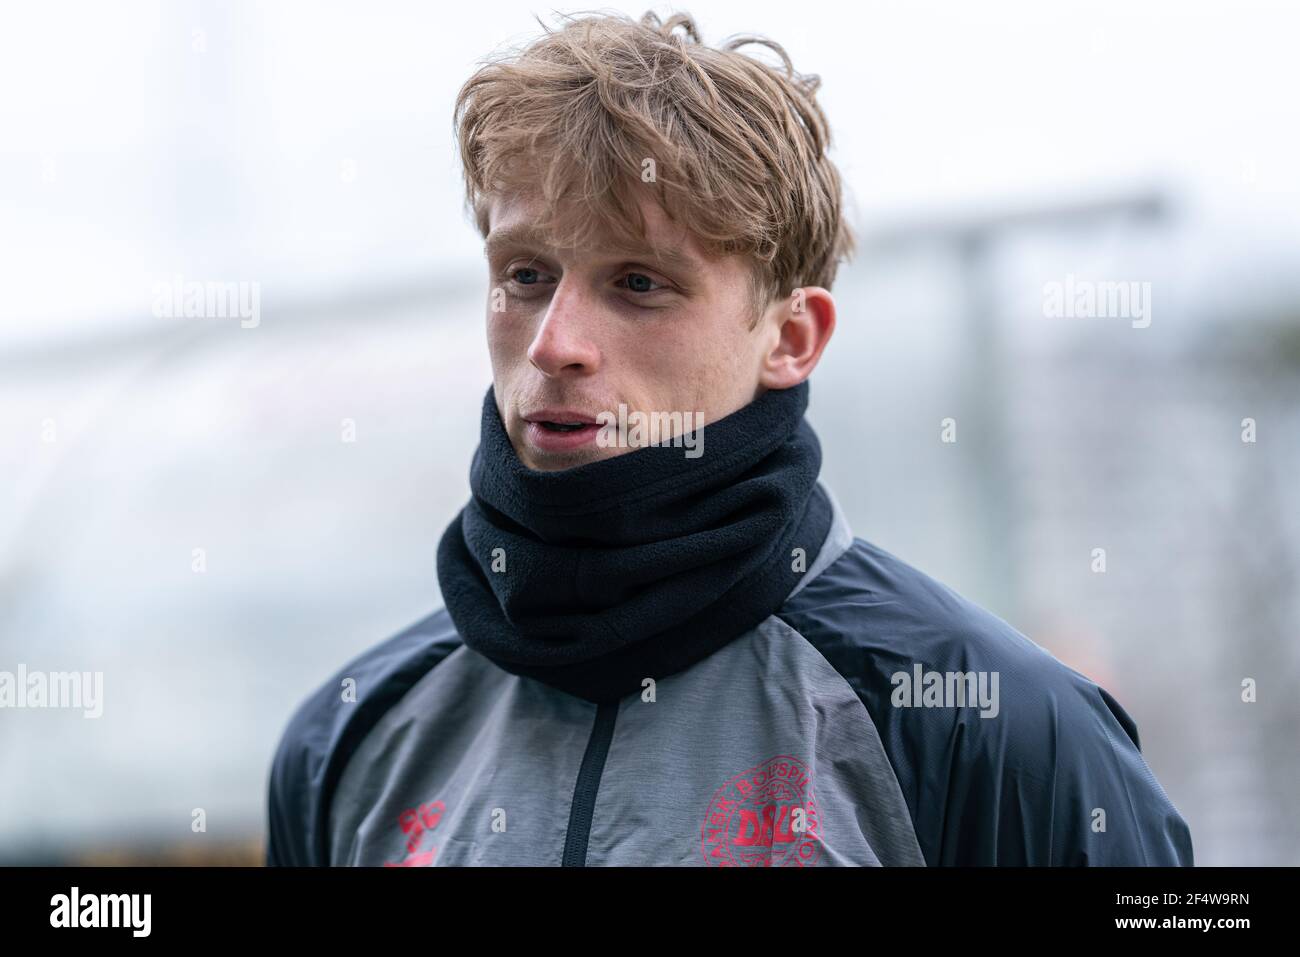 Gladsaxe, Denmark. 22nd Mar, 2021. Mads Roerslev Rasmussen of the Danish under 21 national team seen during a training session before the European Under-21 Championship in Hungary and Slovenia at Gladsaxe Stadium in Gladsaxe, Denmark. (Photo Credit: Gonzales Photo/Alamy Live News Stock Photo